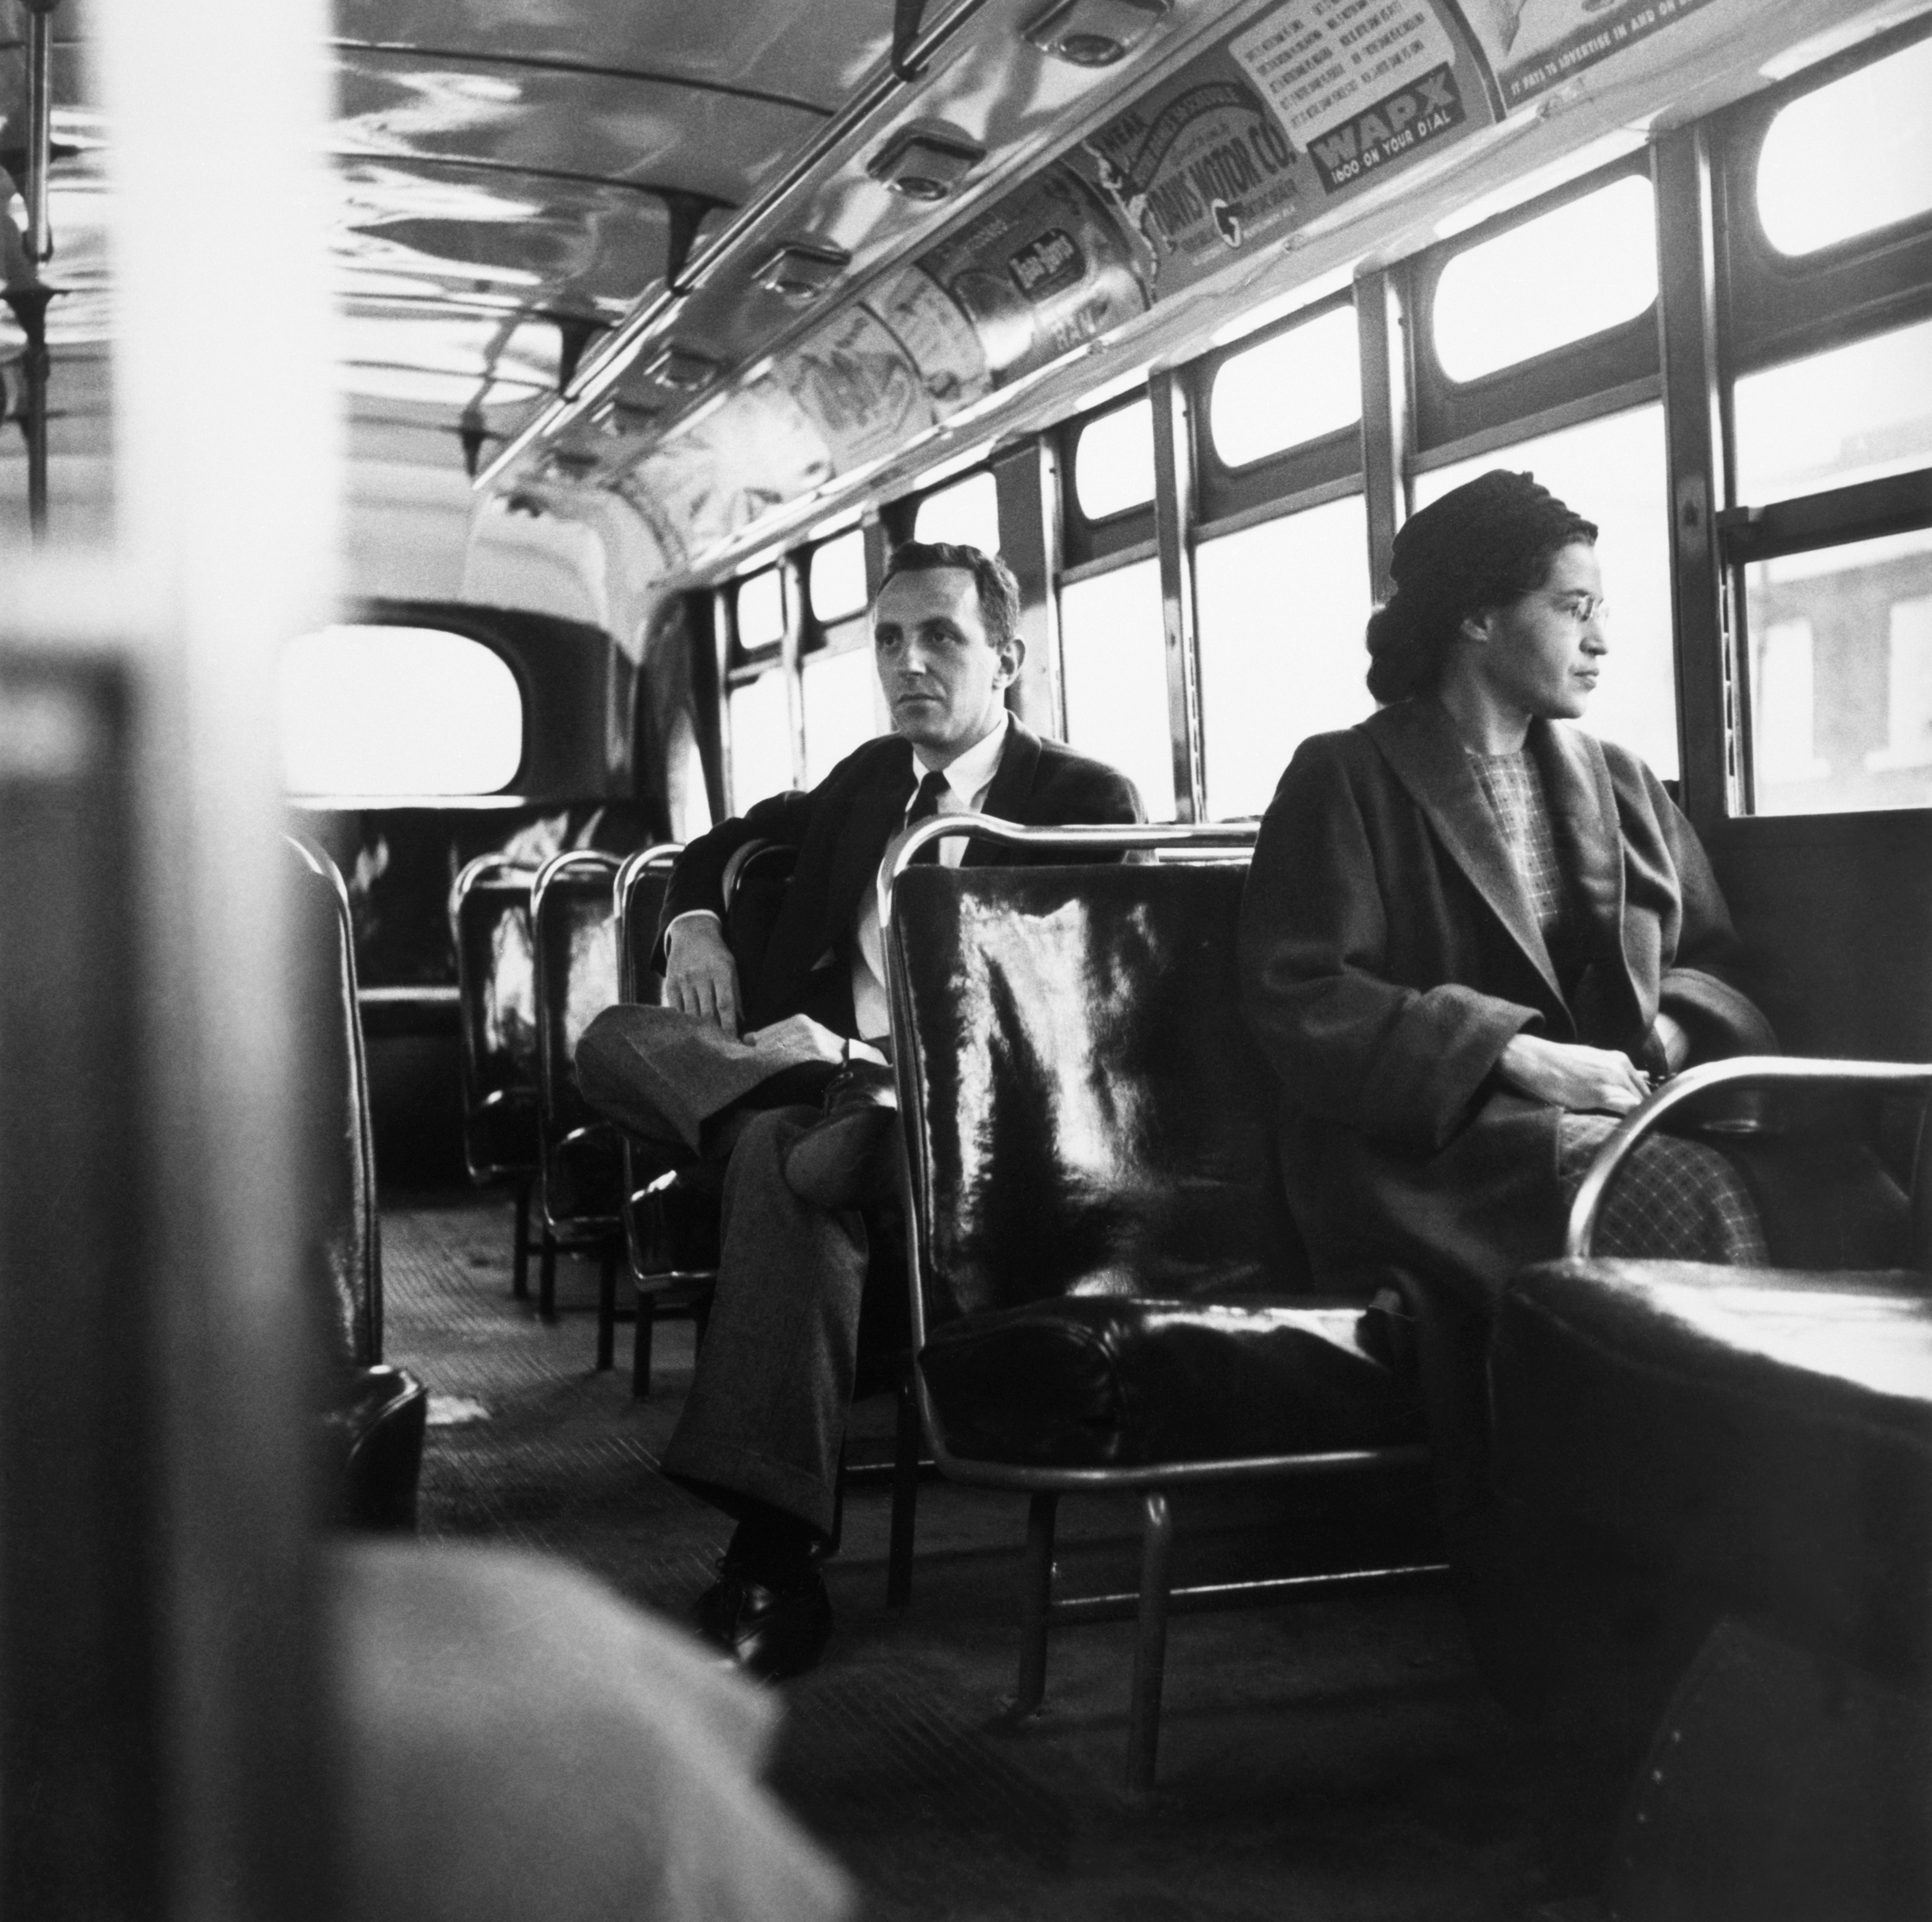 B&W Photo of Rosa Parks sits in the front of a bus in Montgomery, Alabama, after the Supreme Court ruled segregation illegal on the city bus system on December 21st, 1956. Parks was arrested on December 1, 1955 for refusing to give up her seat in the front of a bus in Montgomery set off a successful boycott of the city busses. Man sitting behind Parks is Nicholas C. Chriss, a reporter for United Press International out of Atlanta.